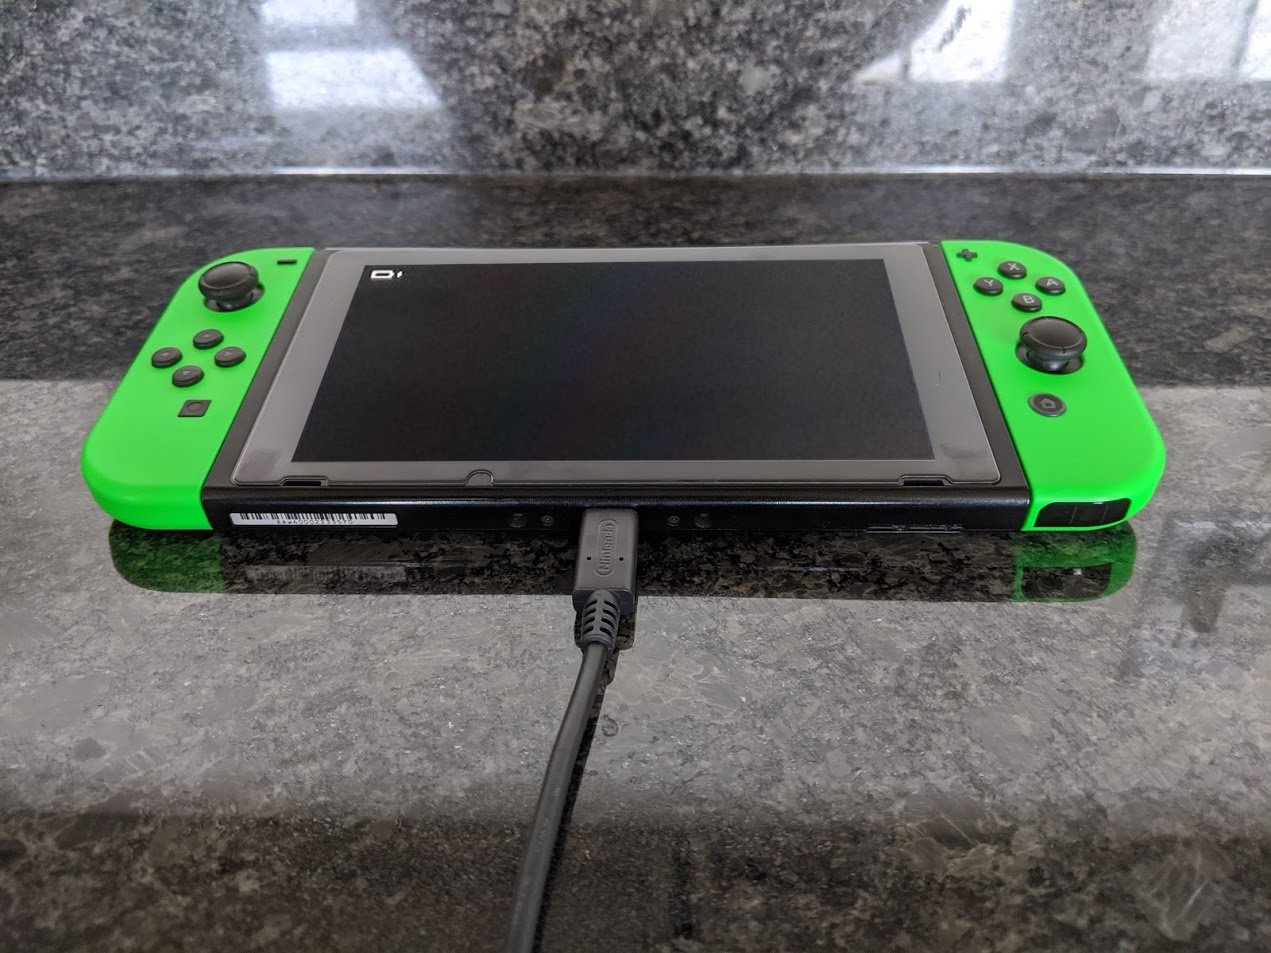 What to do if your Nintendo Switch won't charge step four: unplug the charger from both the outlet and the Switch